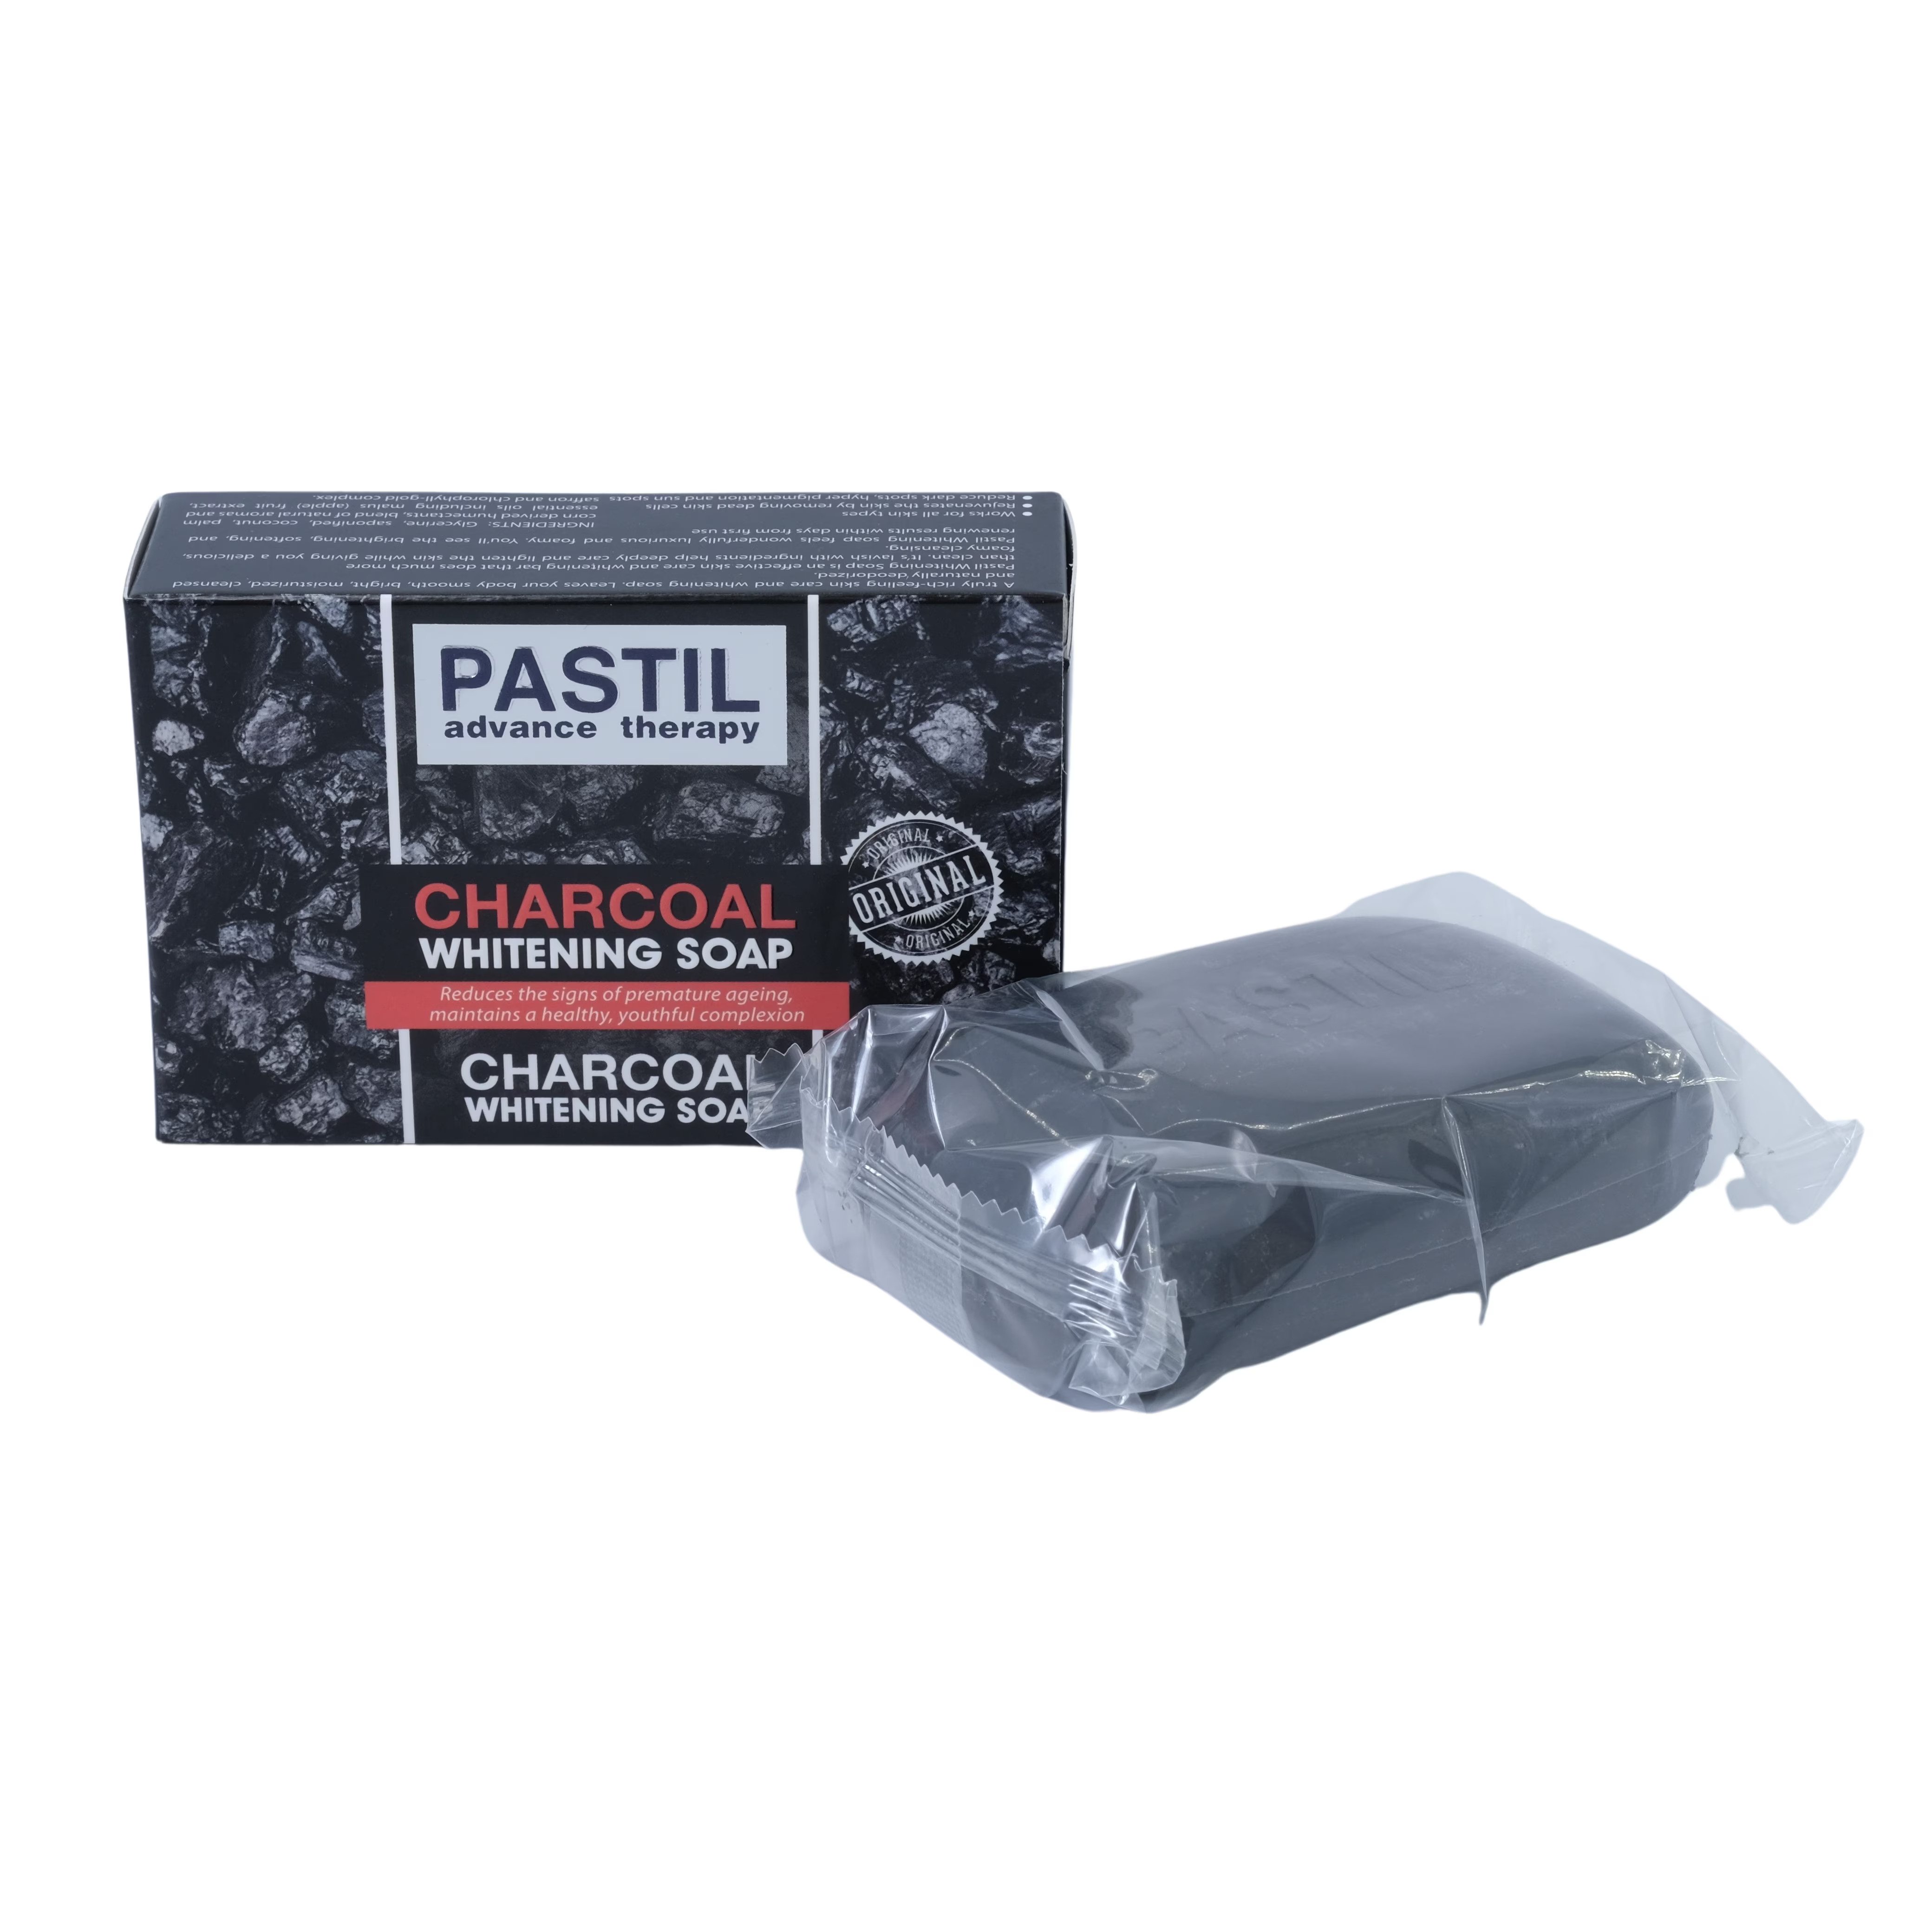 Pastil Advance Therapy Charcoal Whitening Soap, 125g